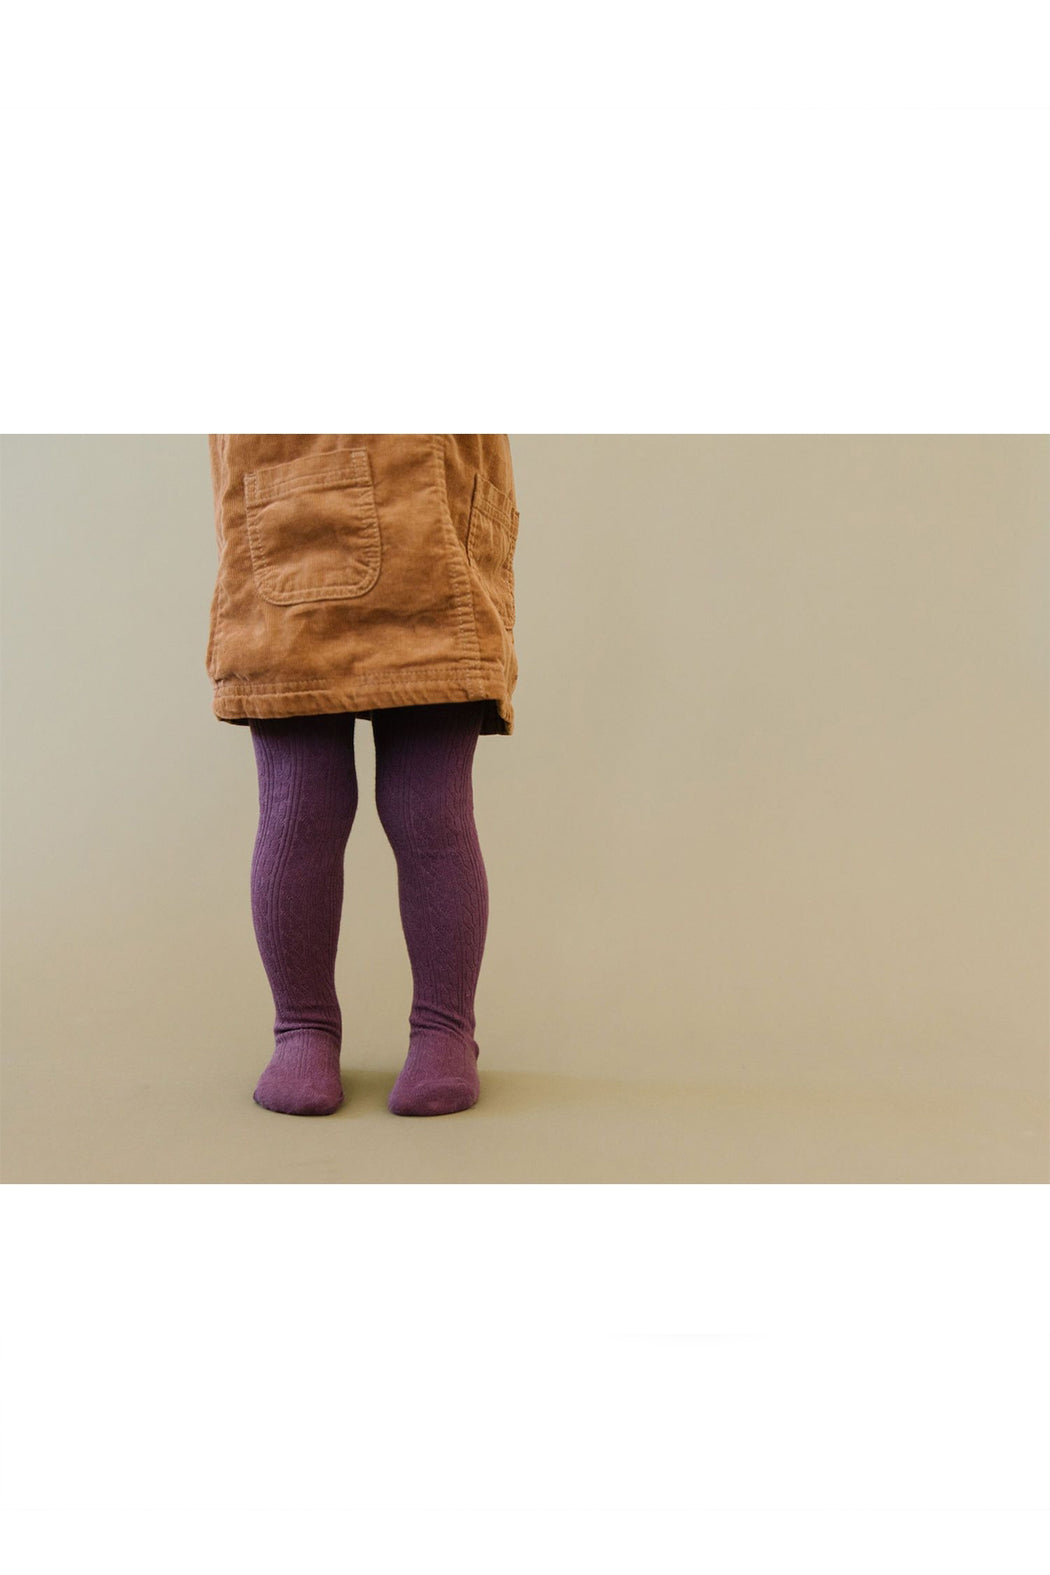 Little Stocking Co Dusty Plum Cable Knit Tights